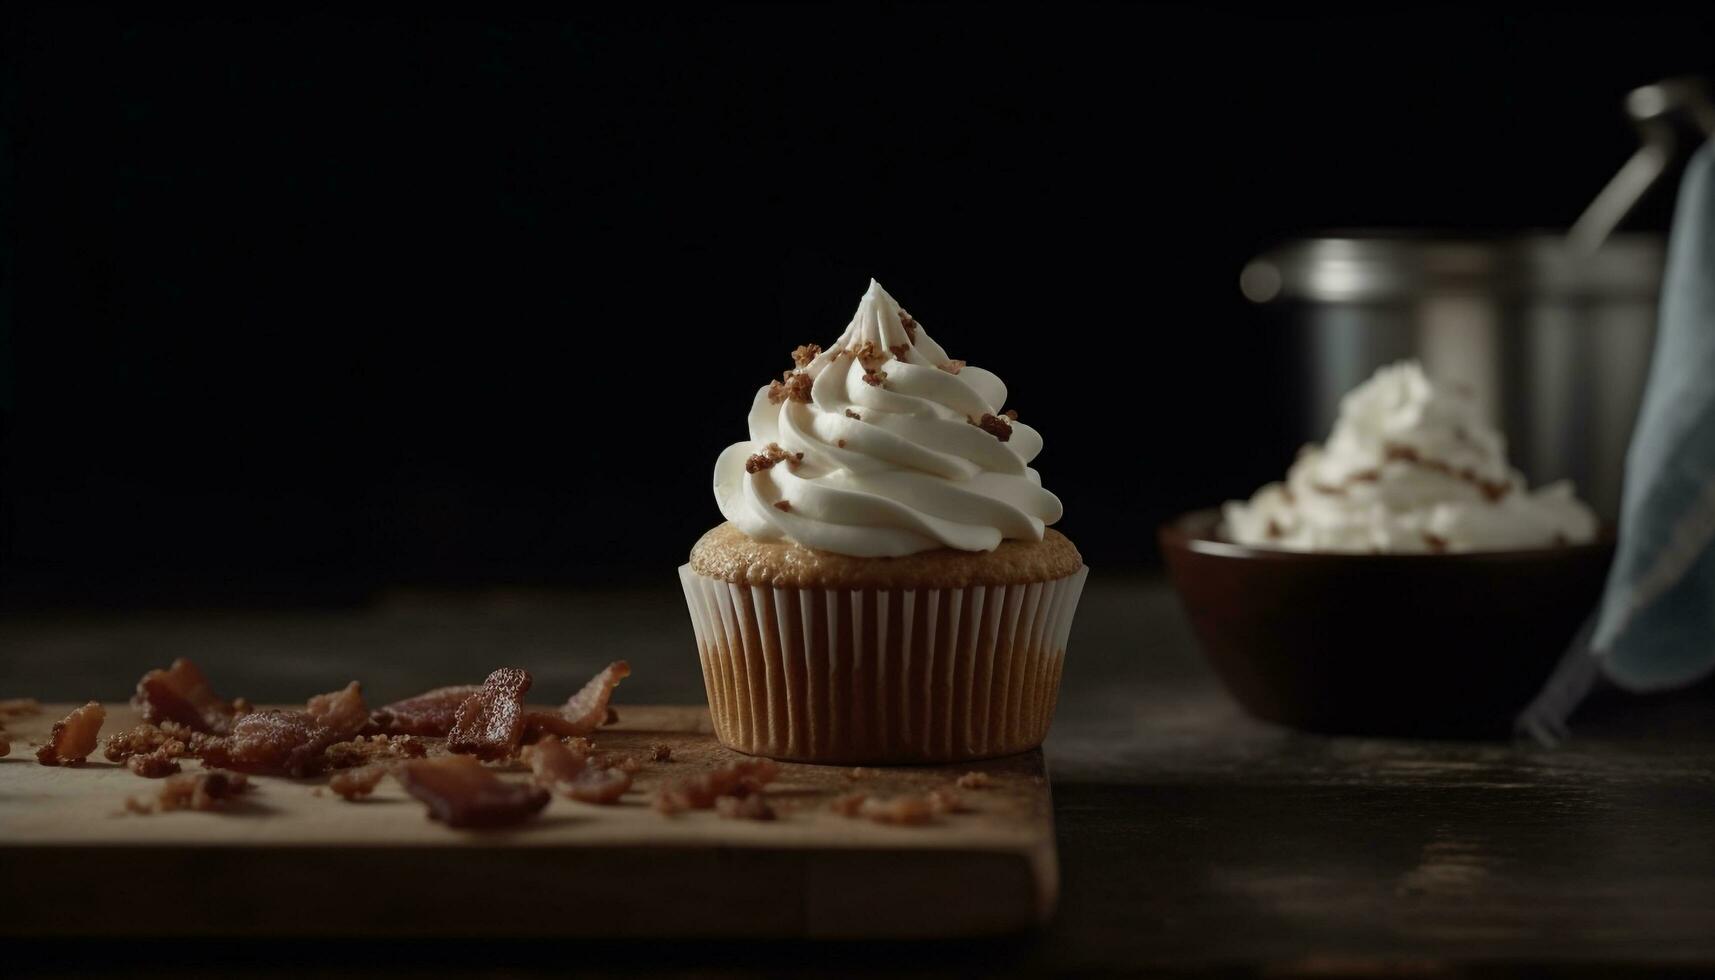 Indulgent homemade cupcakes with chocolate icing, a gourmet dessert delight generated by AI photo